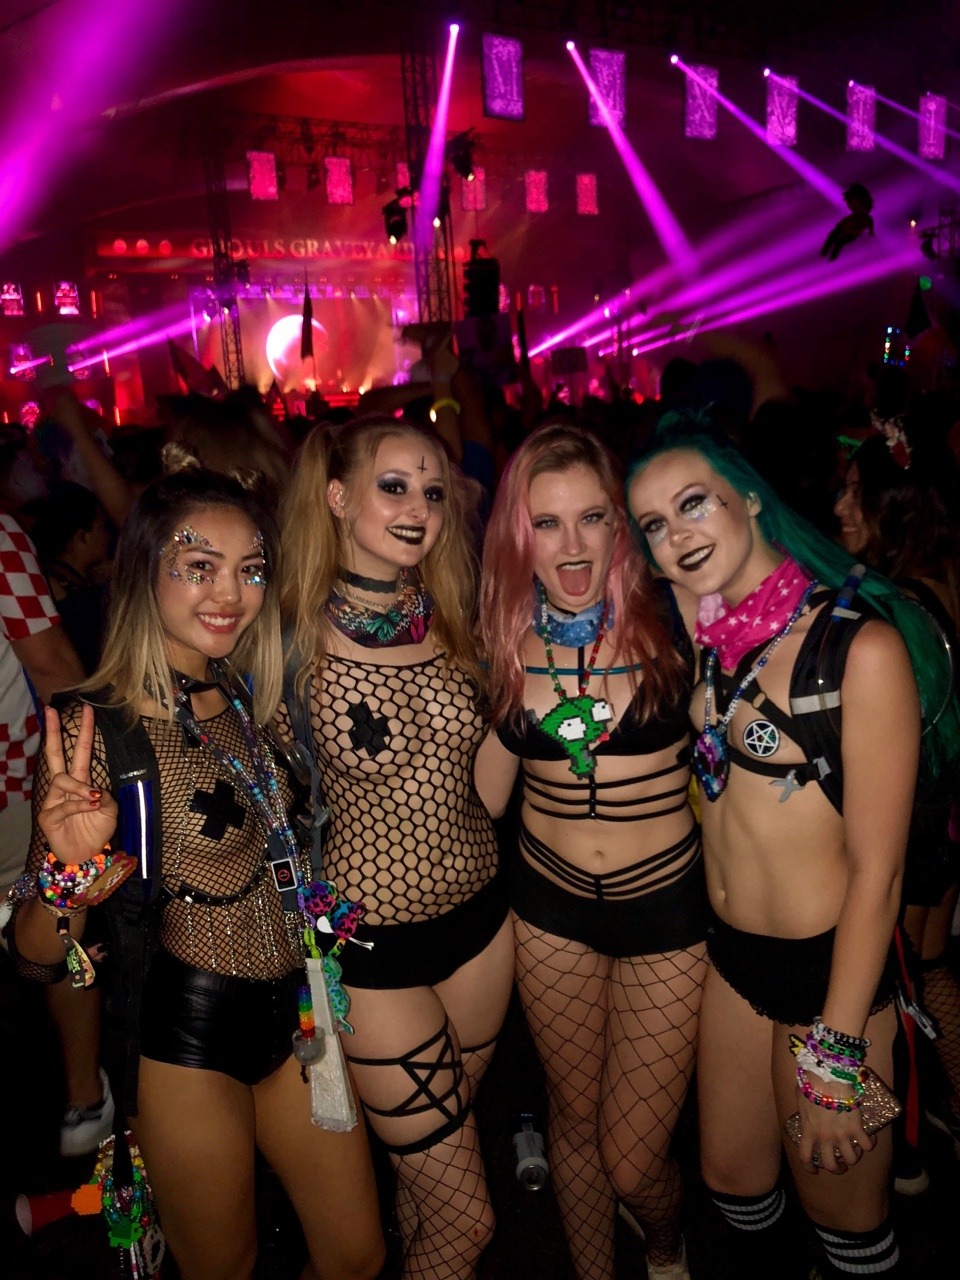 Slutty rave outfits